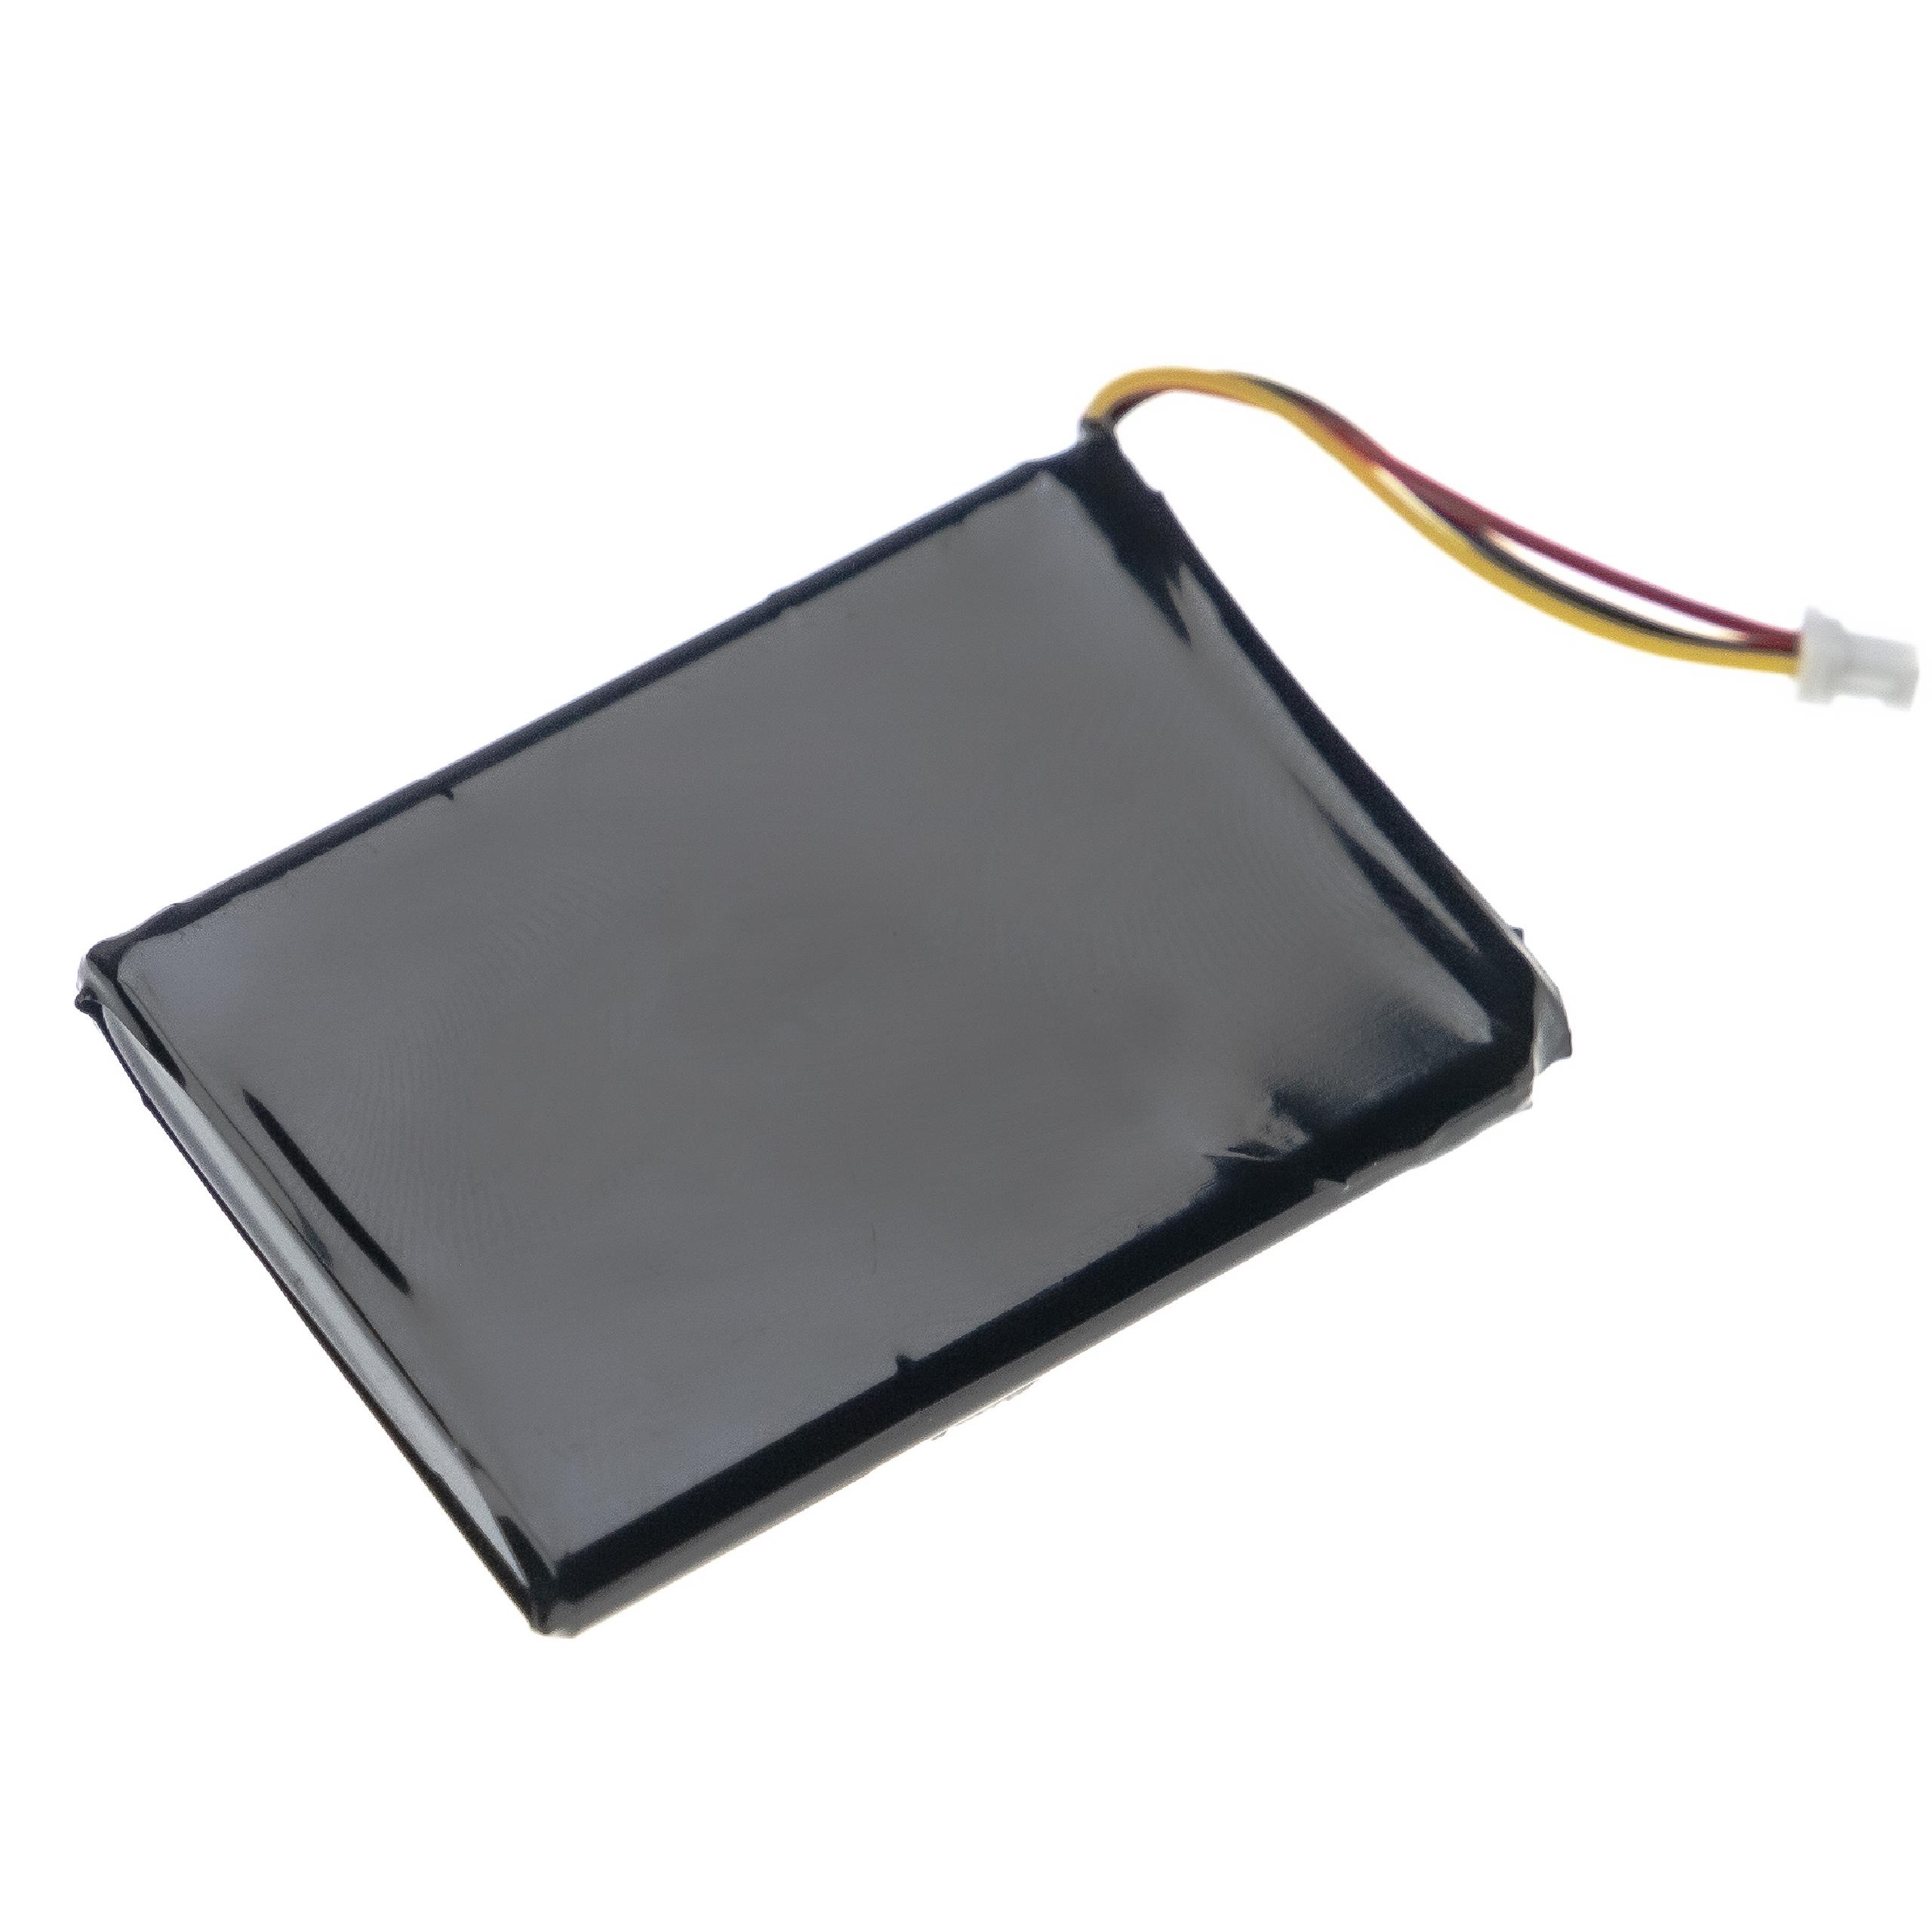 GPS Battery Replacement for Garmin 361-00056-00, 361-00045-00, 1ICP5/34/45, 1ICP4/34/5 - 750mAh, 4.2V